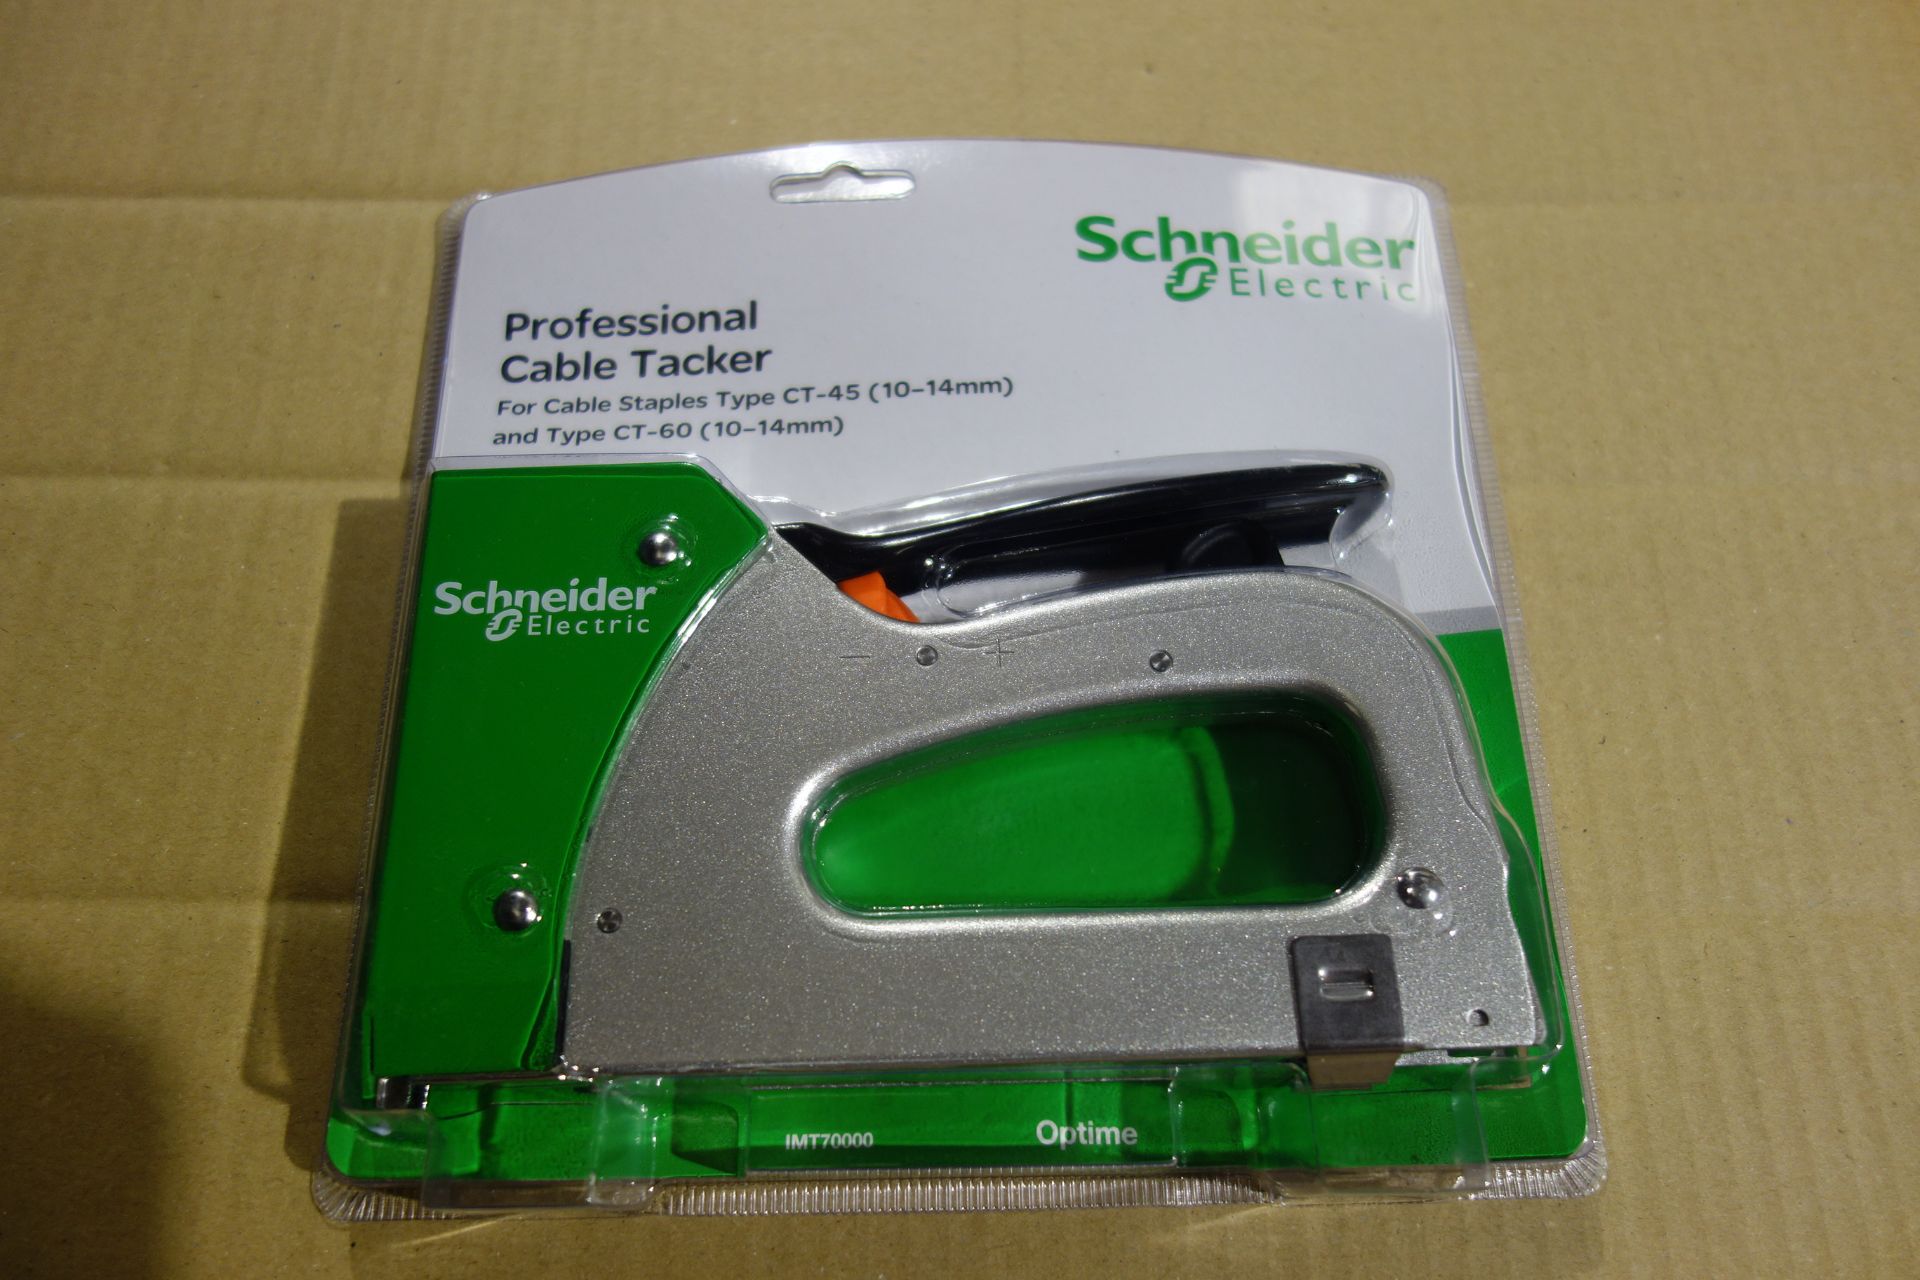 5 X Schneider IMT7000 Professional Cable Tackers They Take Type CT-45 10-14MM + Type CT 60 10-14MM